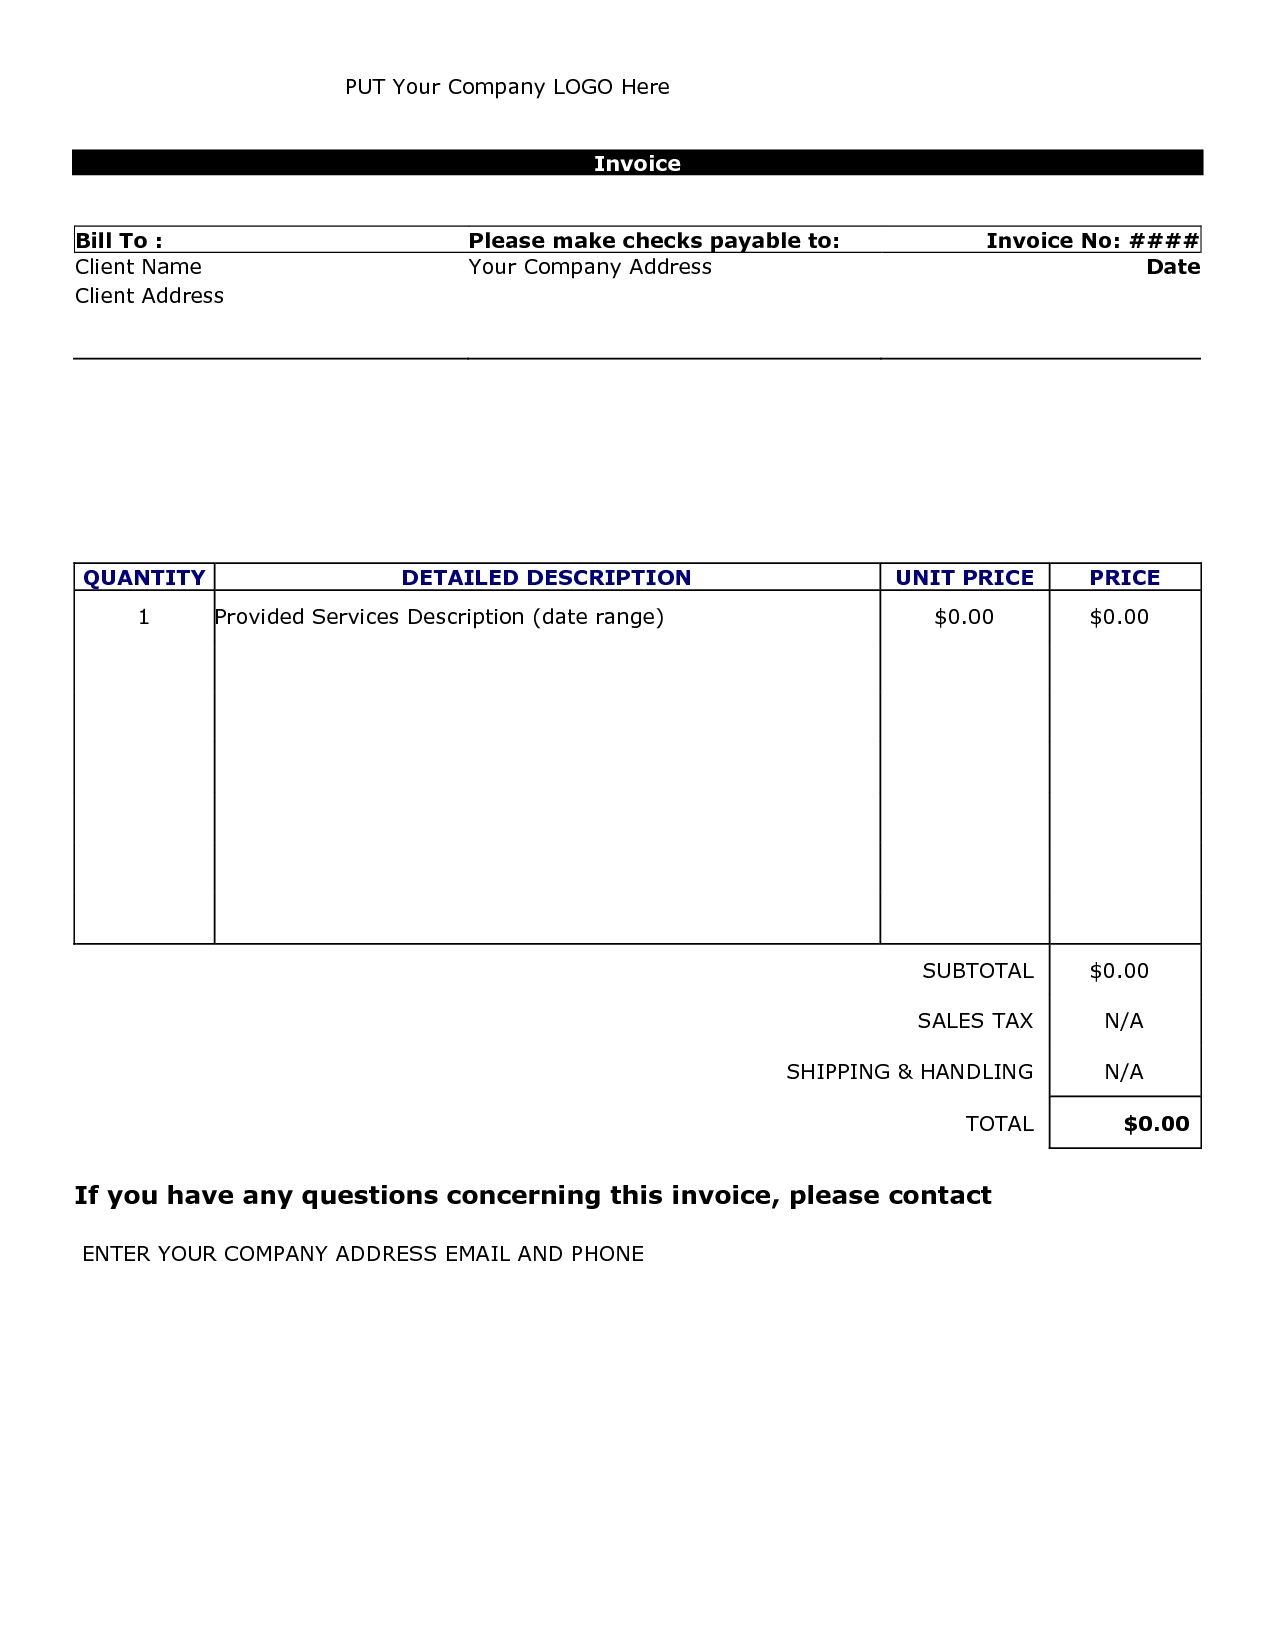 invoice template word document scanzgo sample invoice document